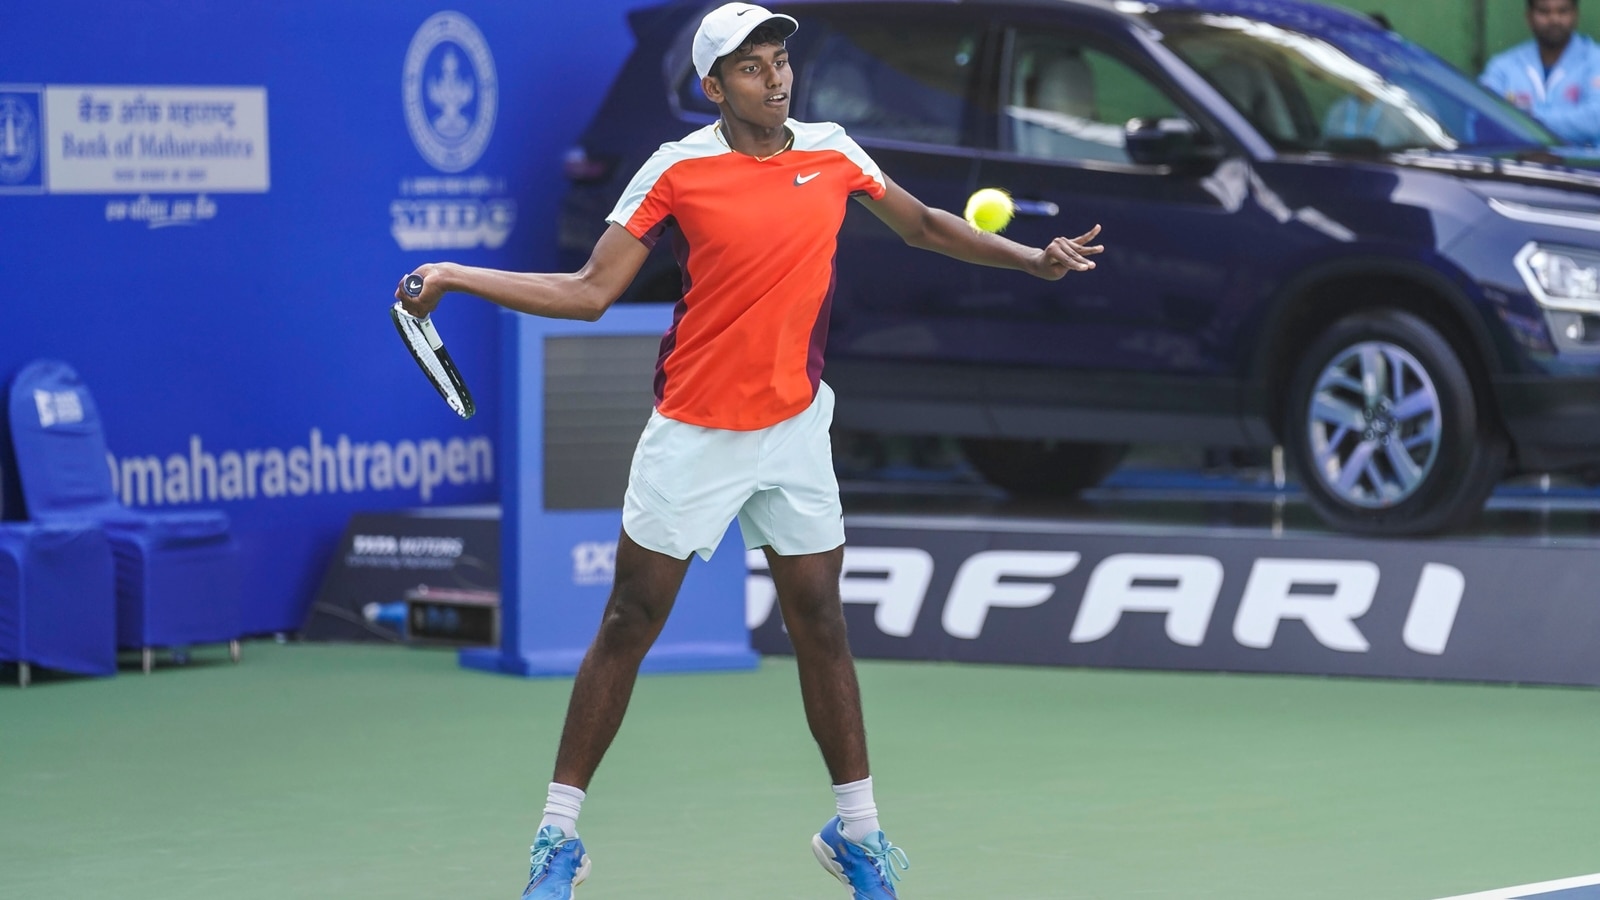 15-year-old Manas Dhamne impresses in first round Tata Open loss Tennis News